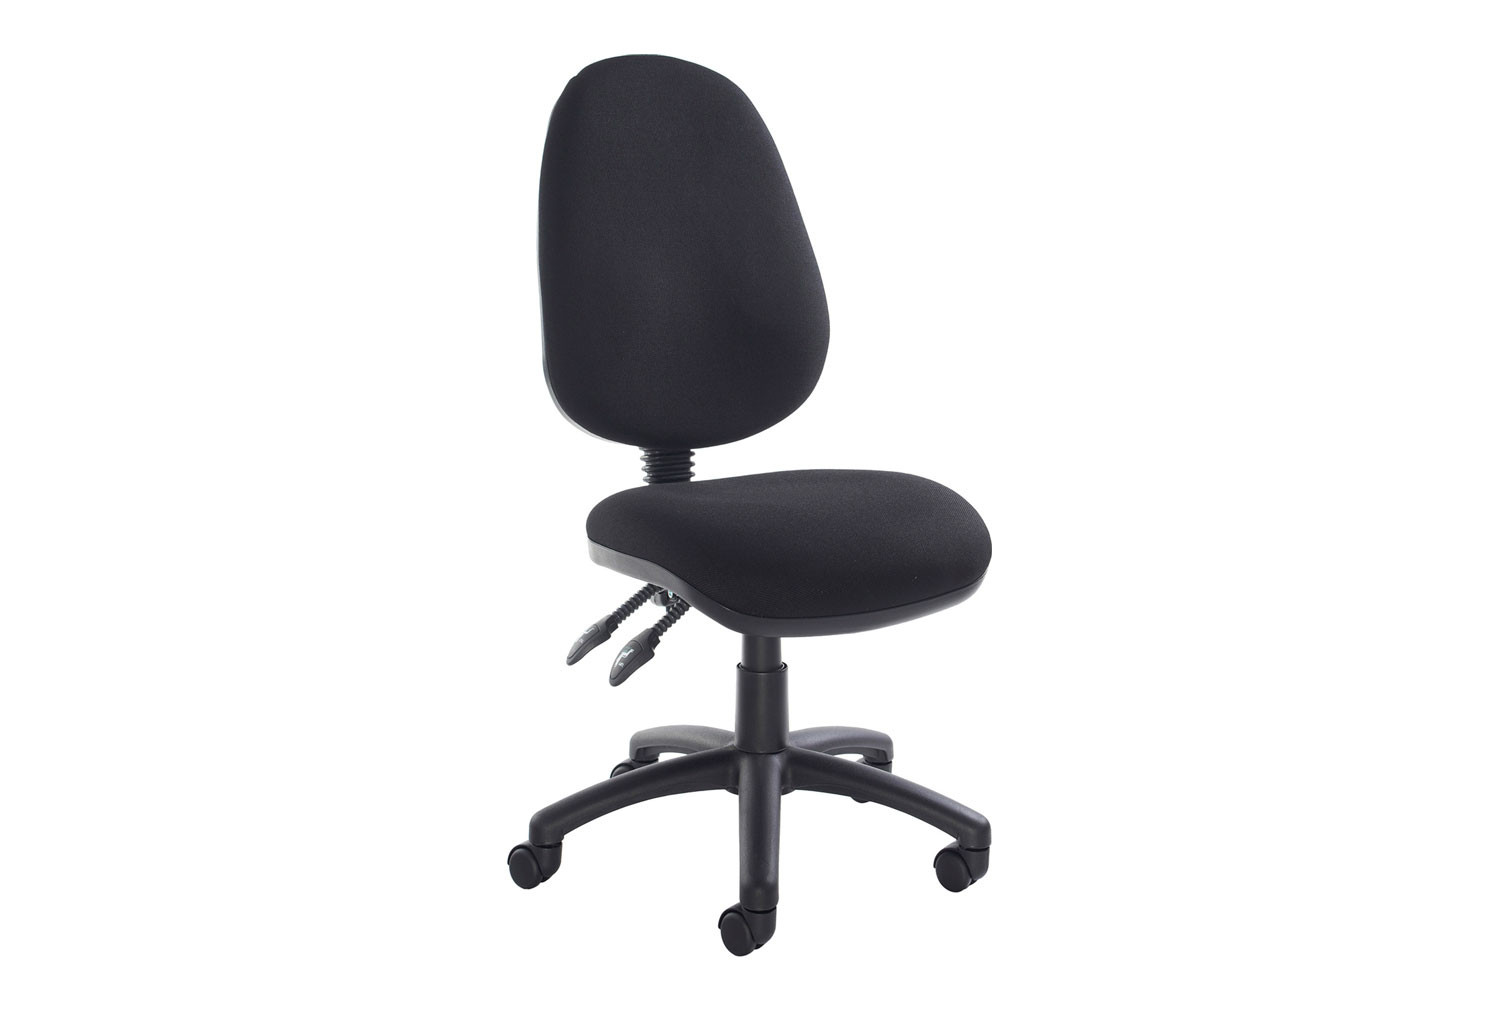 Choosing the Best Office Chair for Working at Home